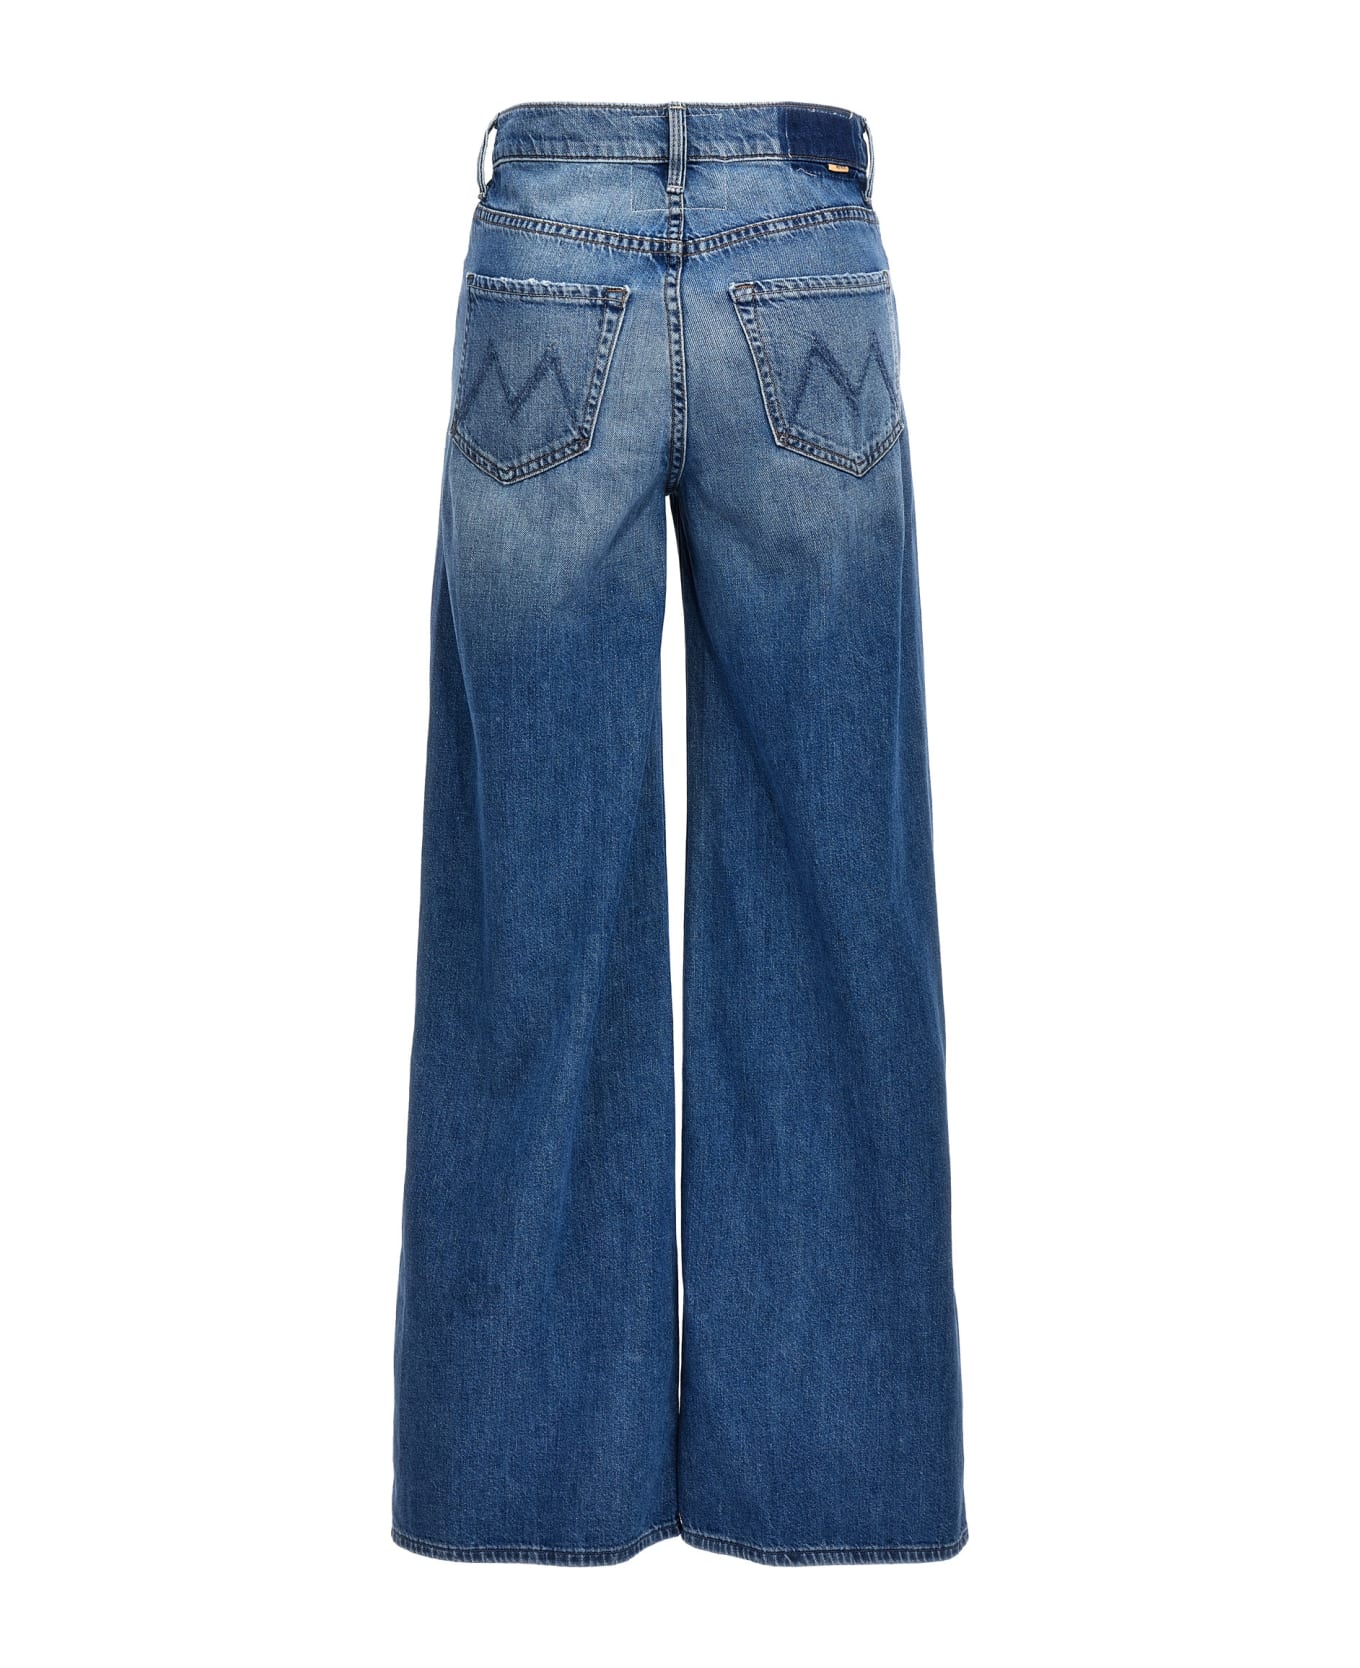 Mother 'the Ditcher Roller Sneak' Jeans - Blue